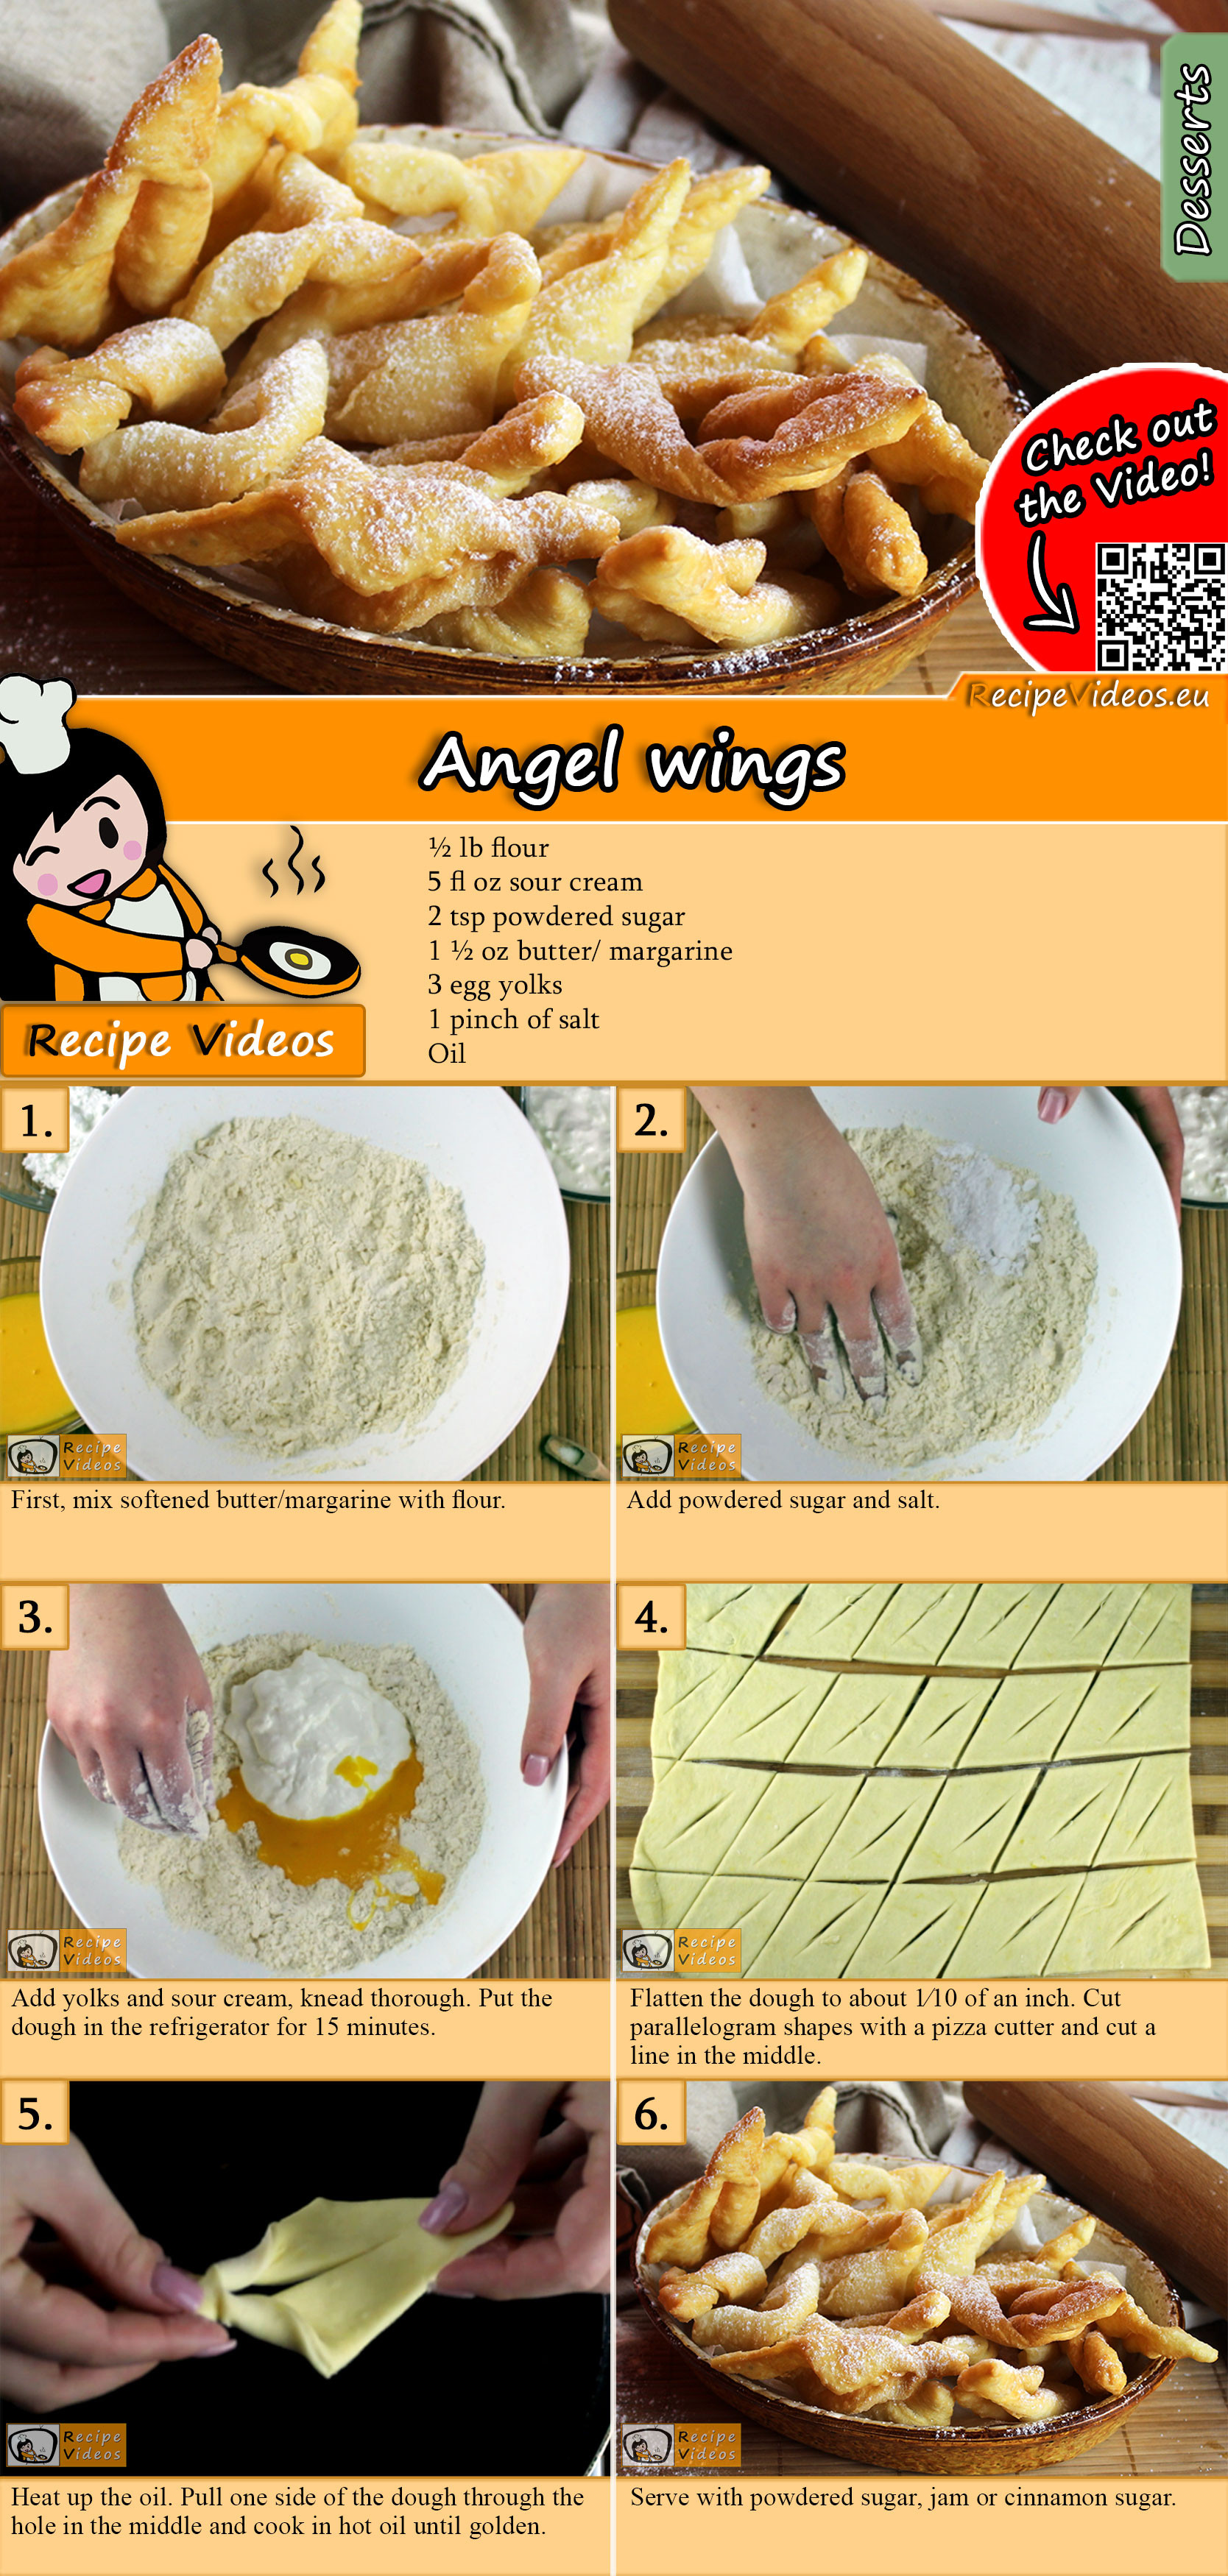 Angel wings recipe with video